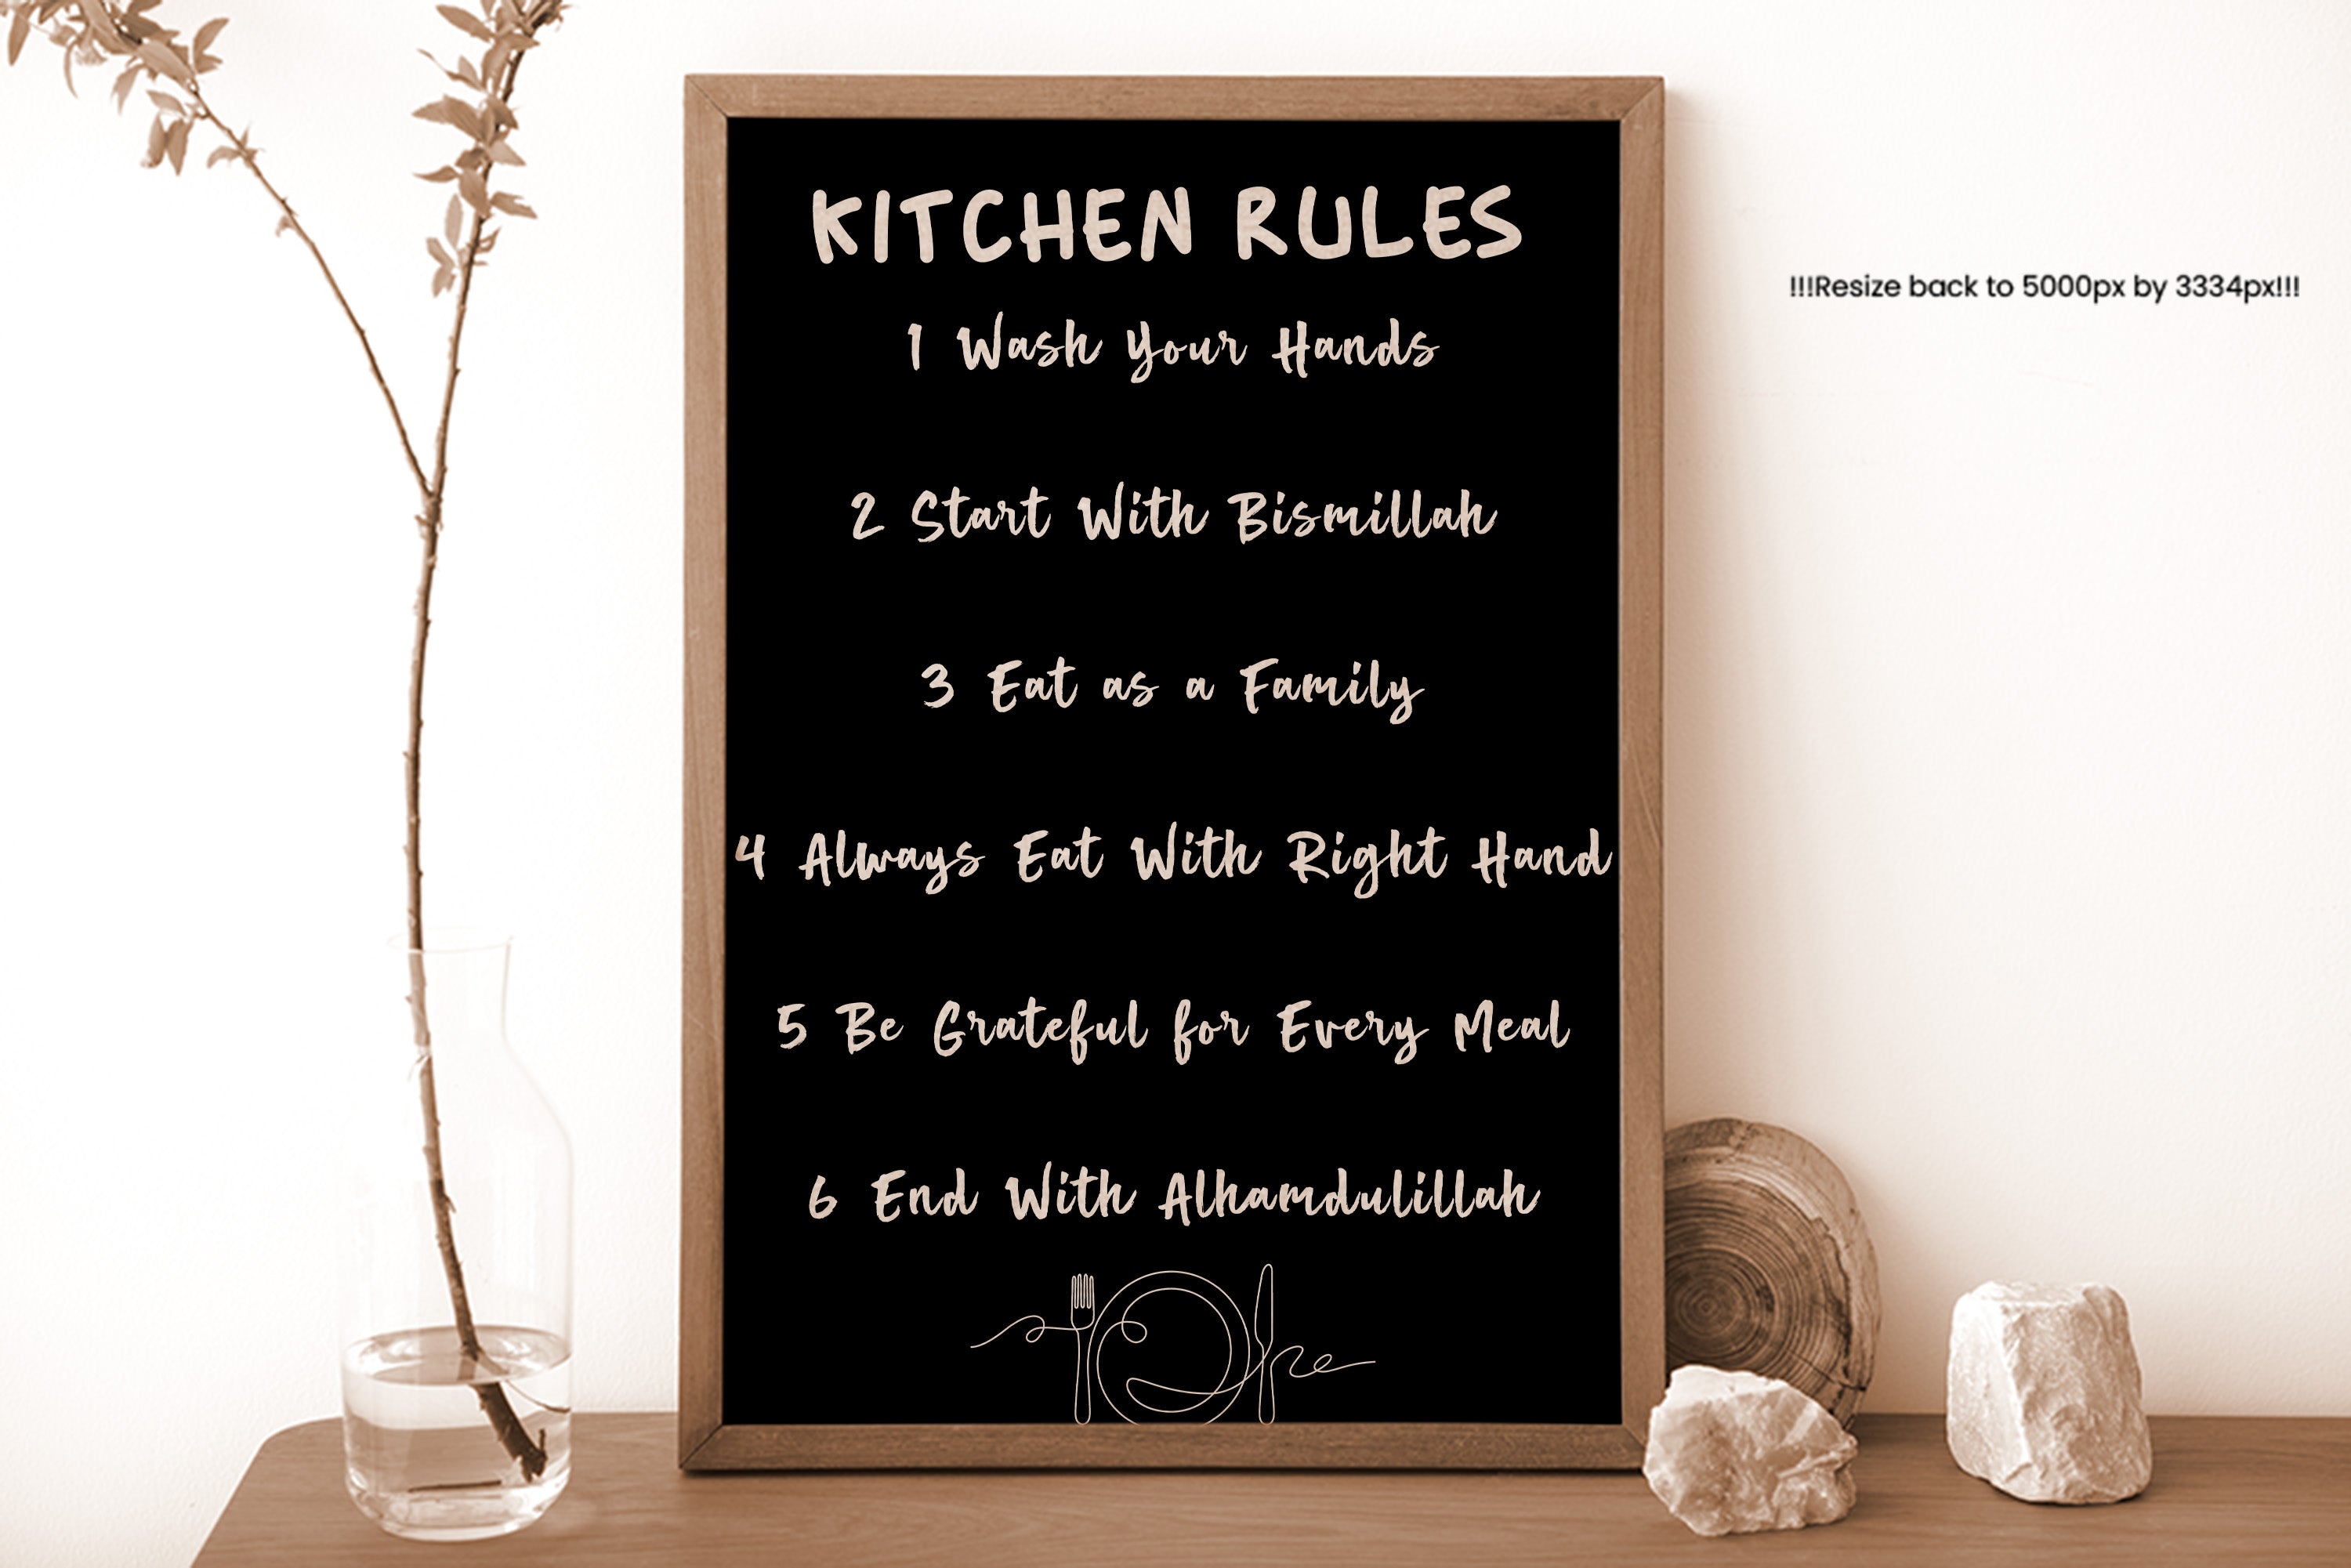 Black & White Chalk Effect Kitchen Rules Poster Kitchen Dining Room Islamic Wall Prints - Peaceful Arts ltd